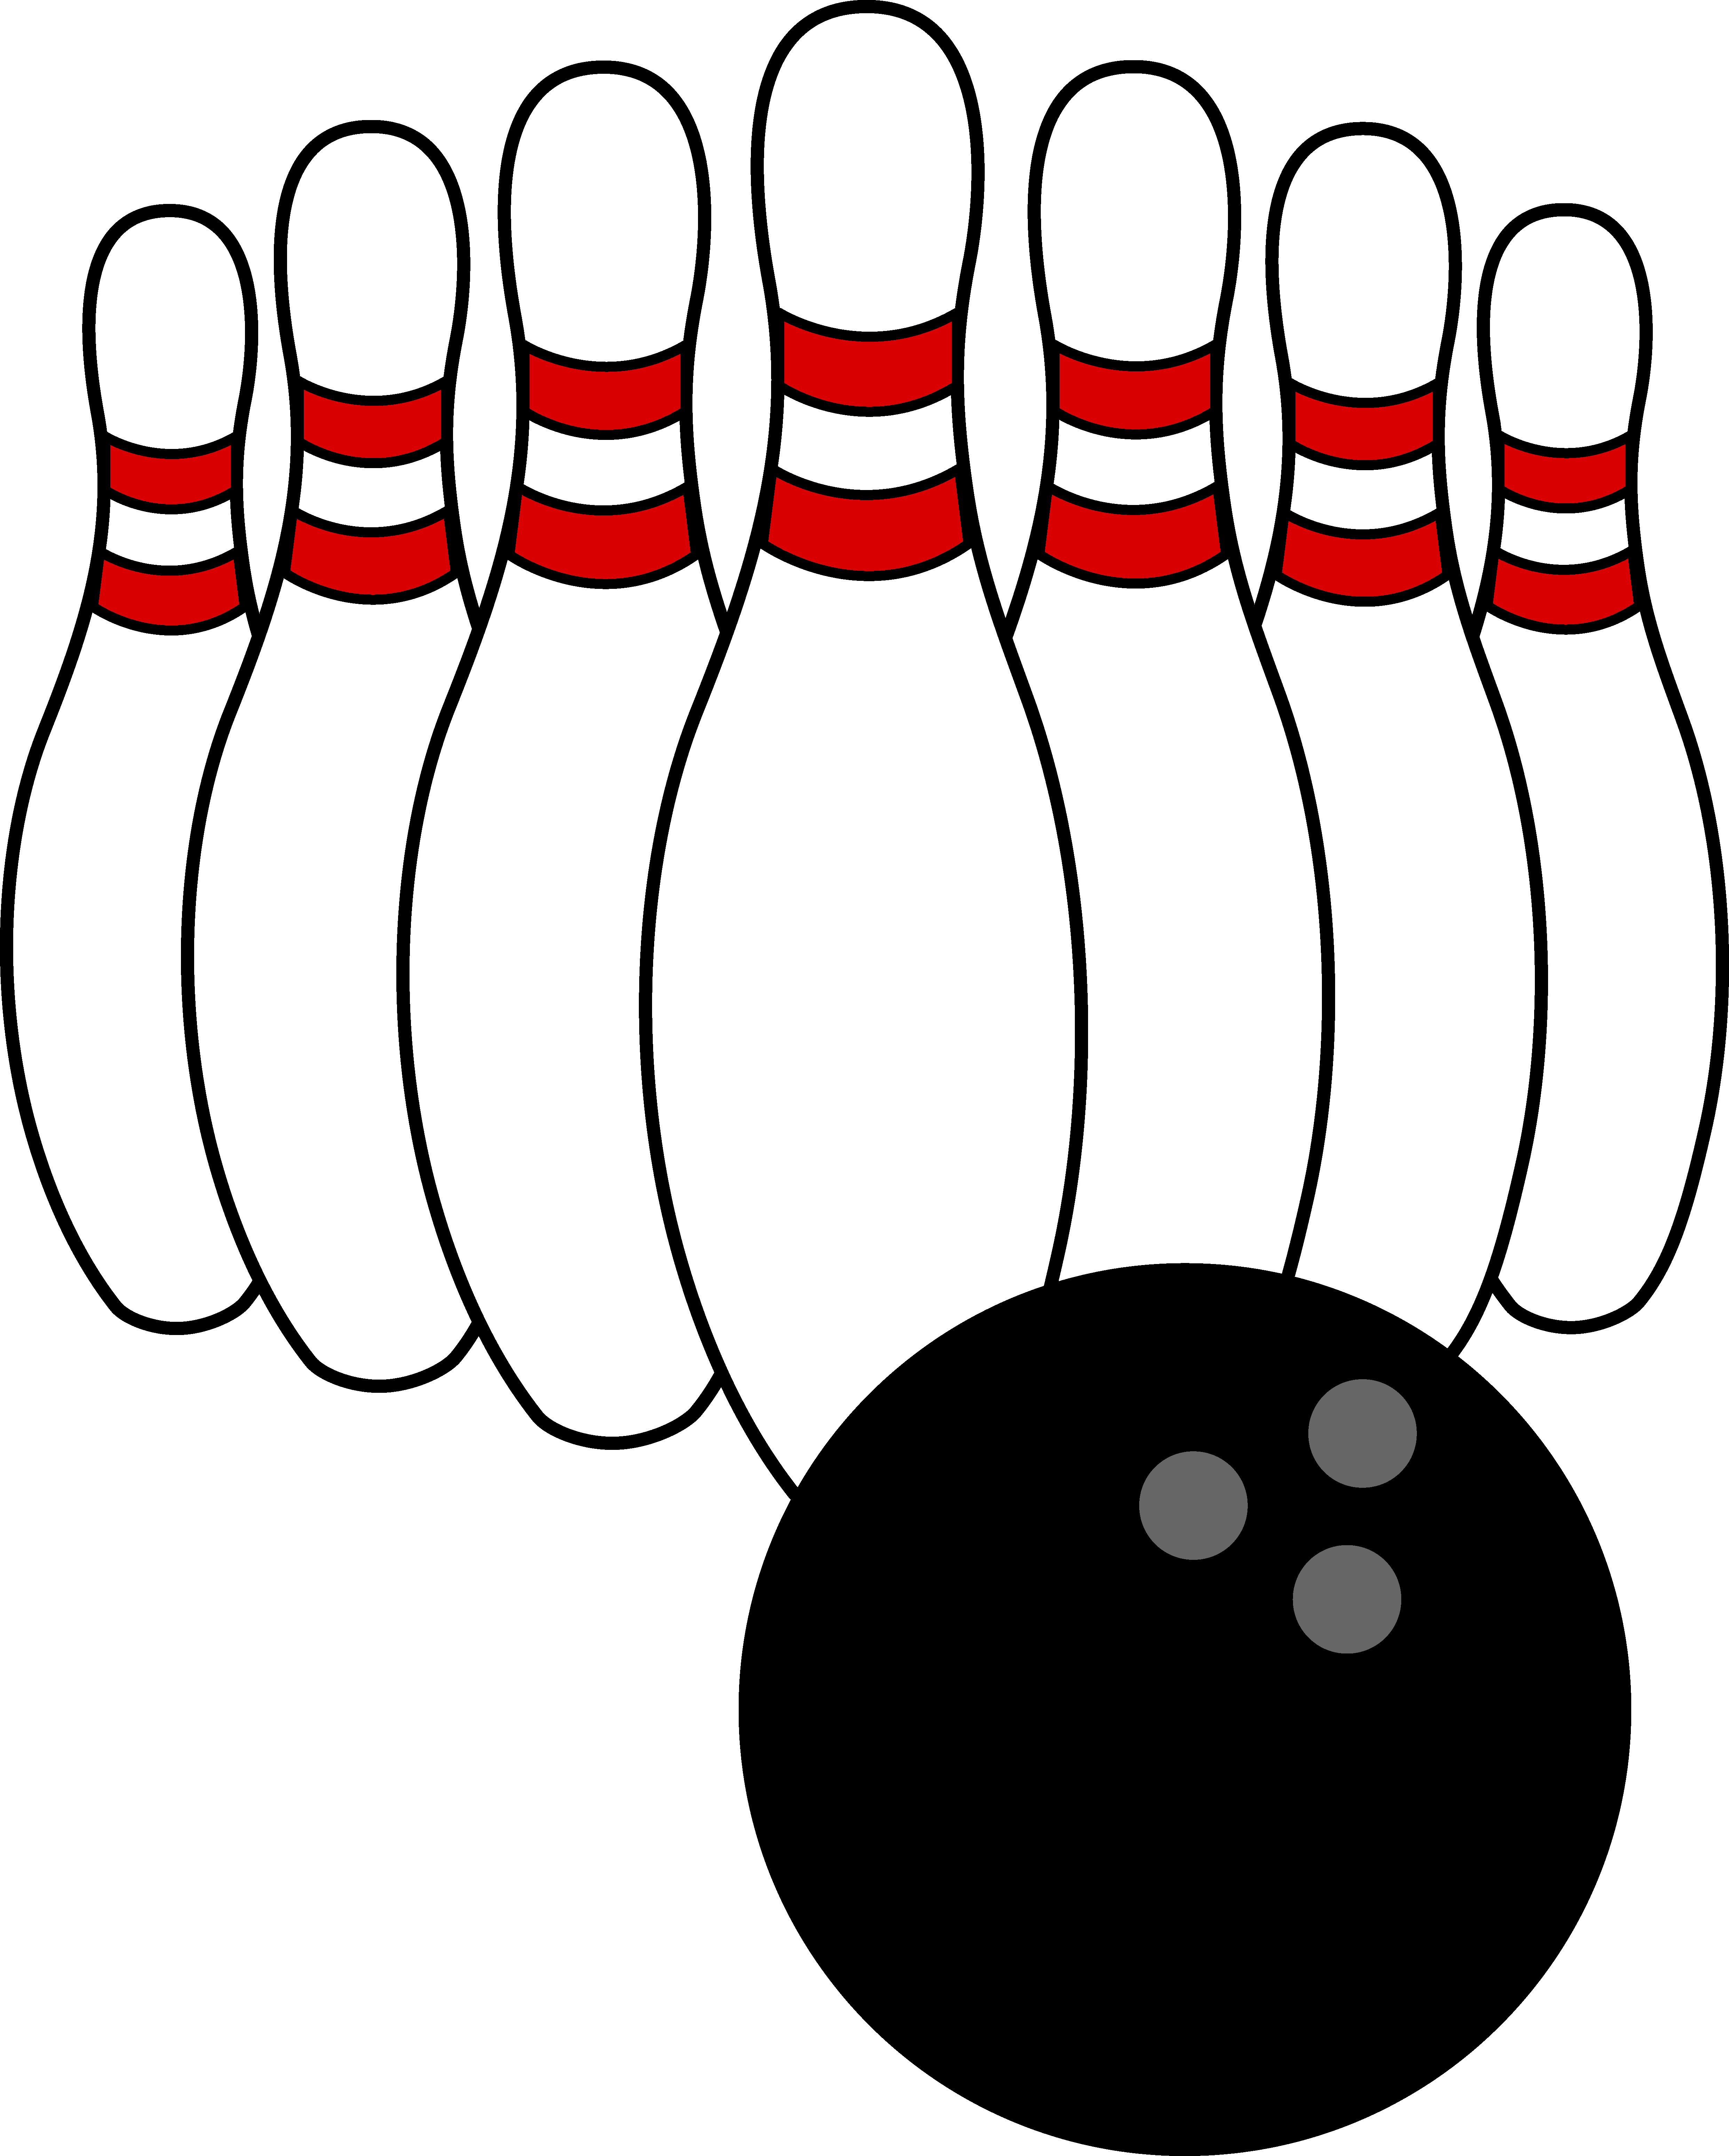 Bowling clipart free download clip art on 2